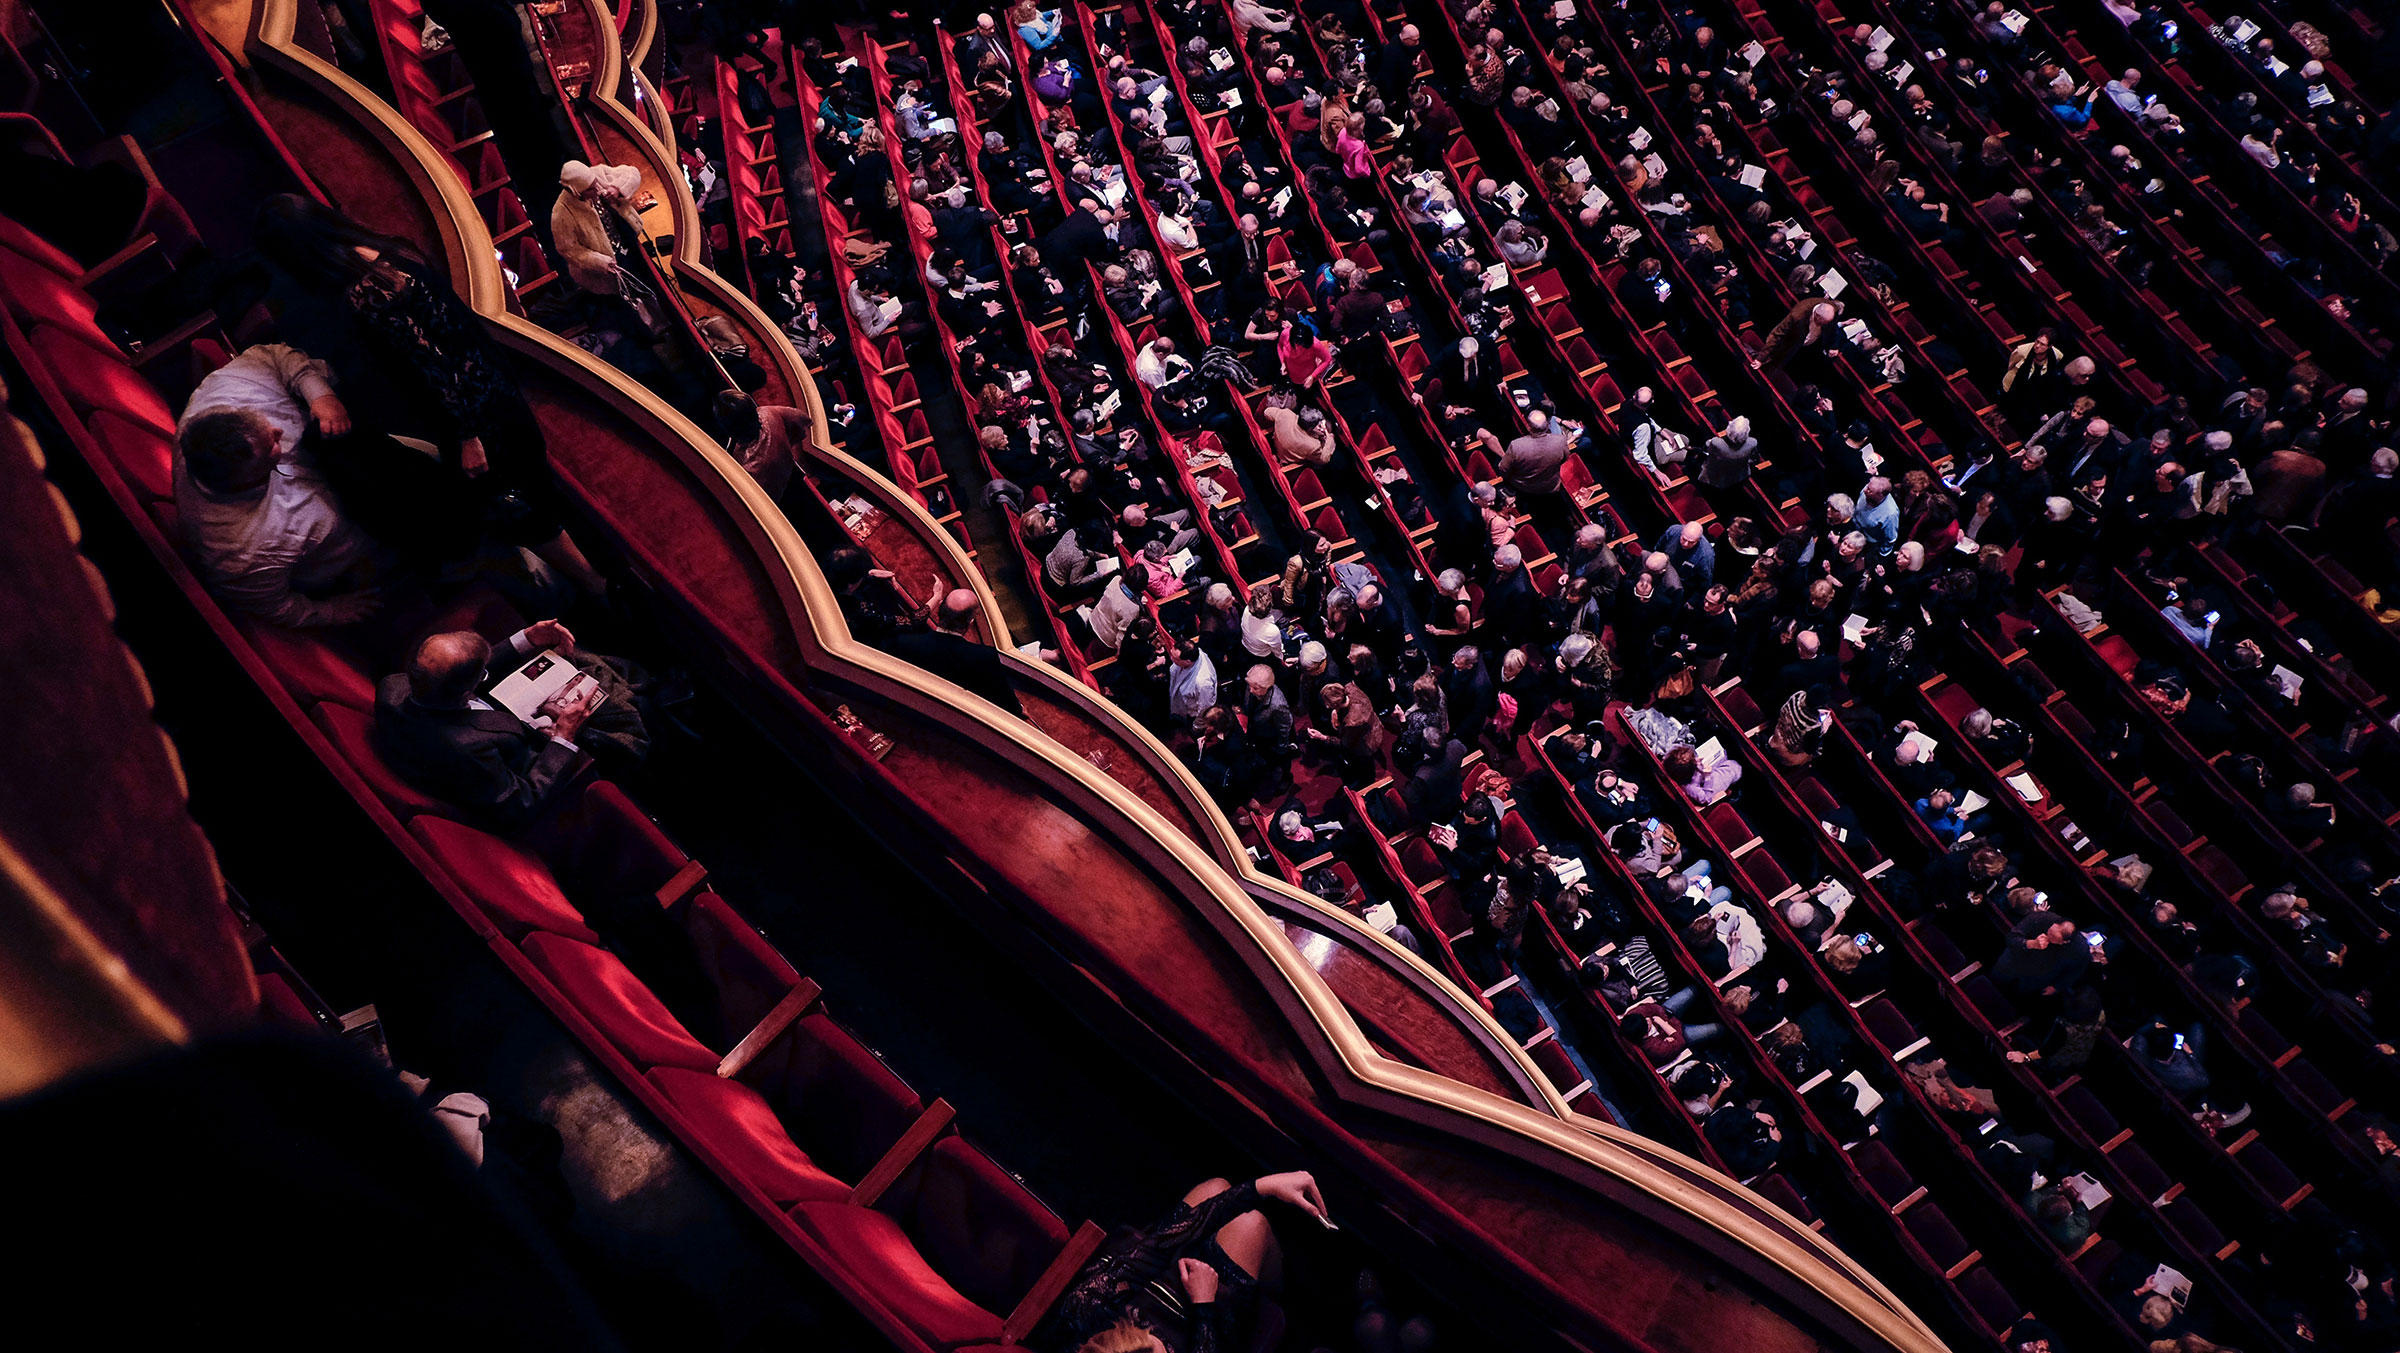 A sideways photo of an audience in a concert hall